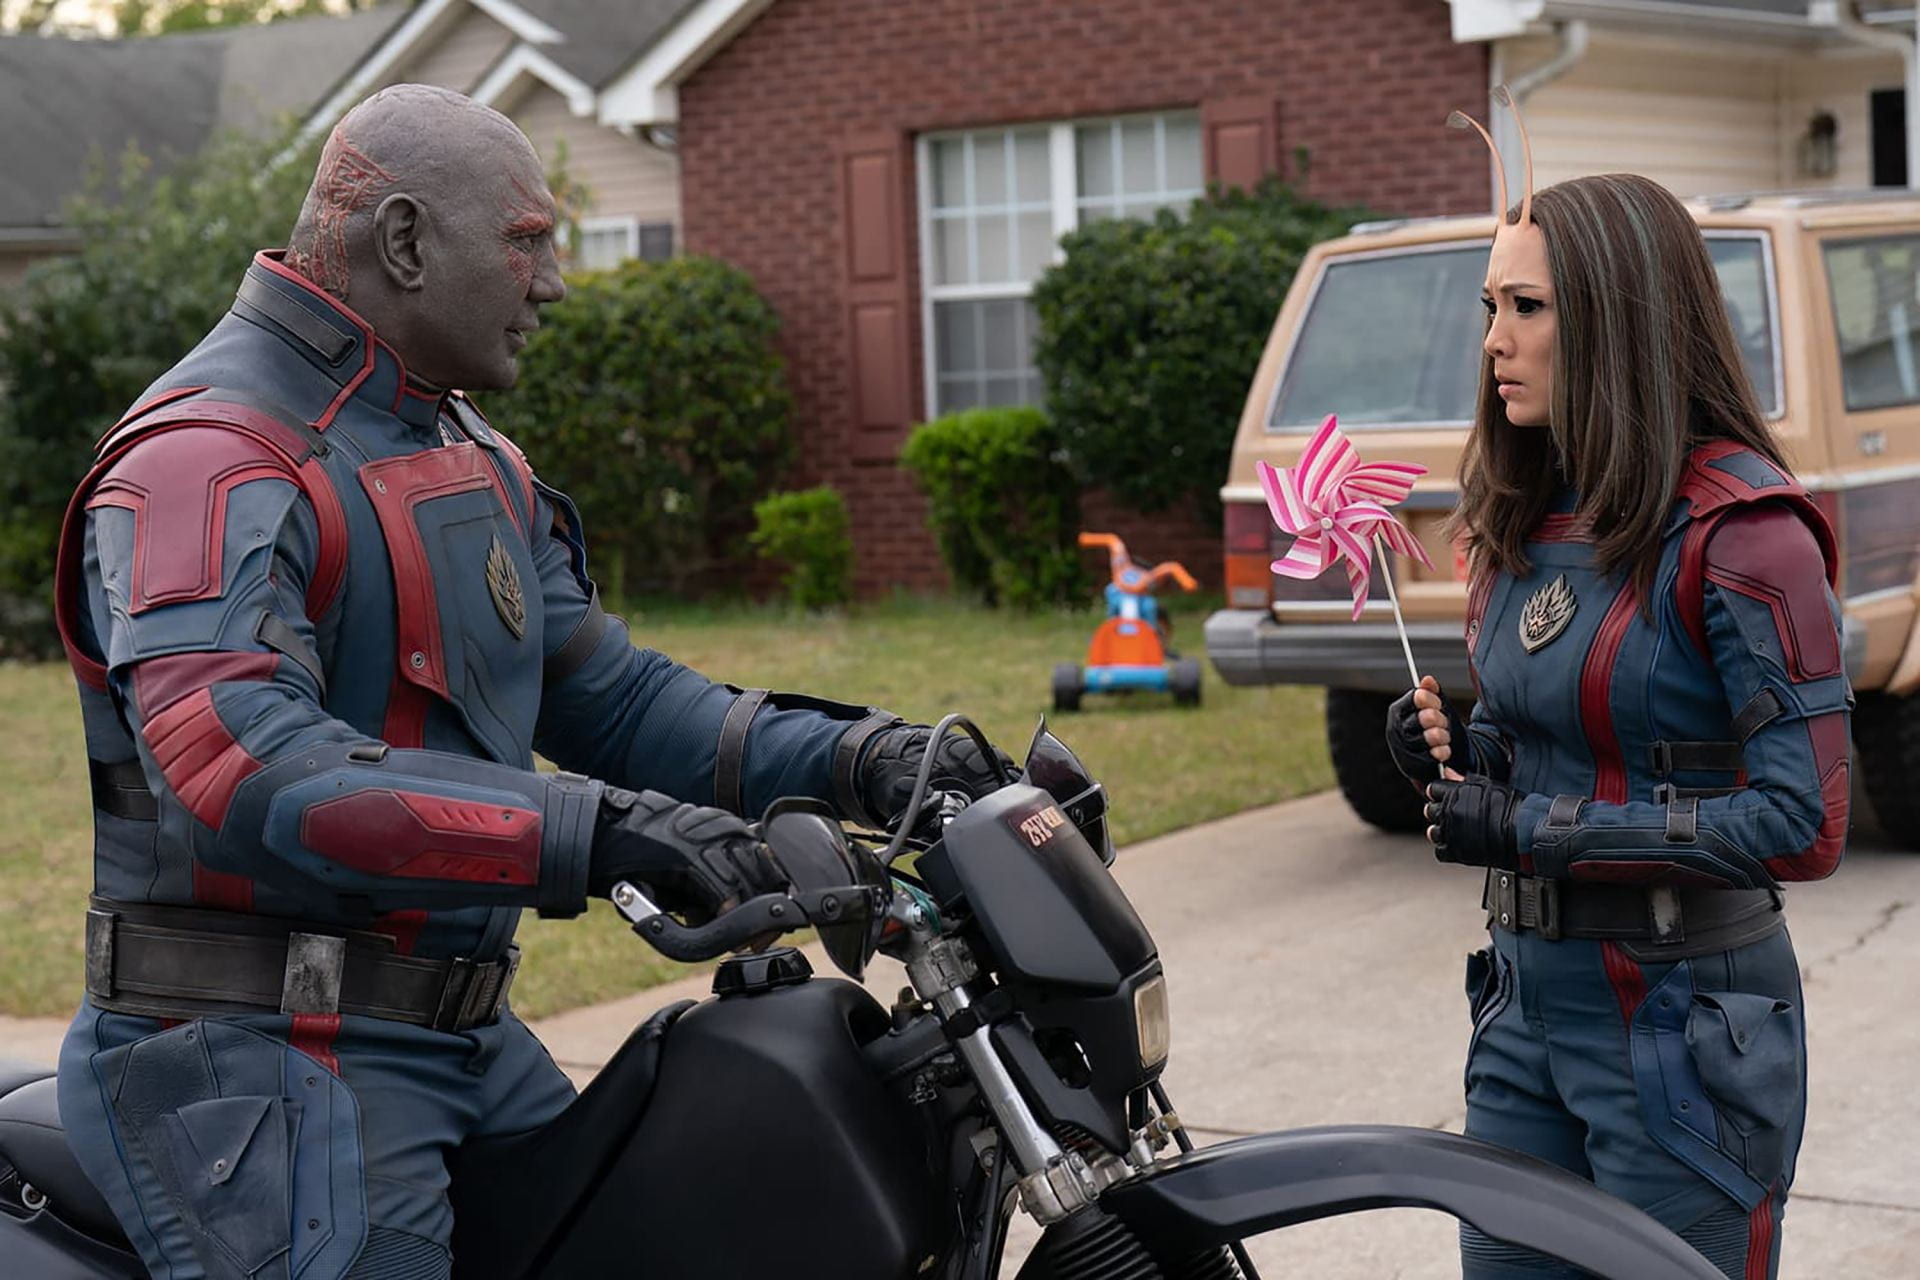 Review: Avengers Endgame is three of Marvel's best films, rolled into one